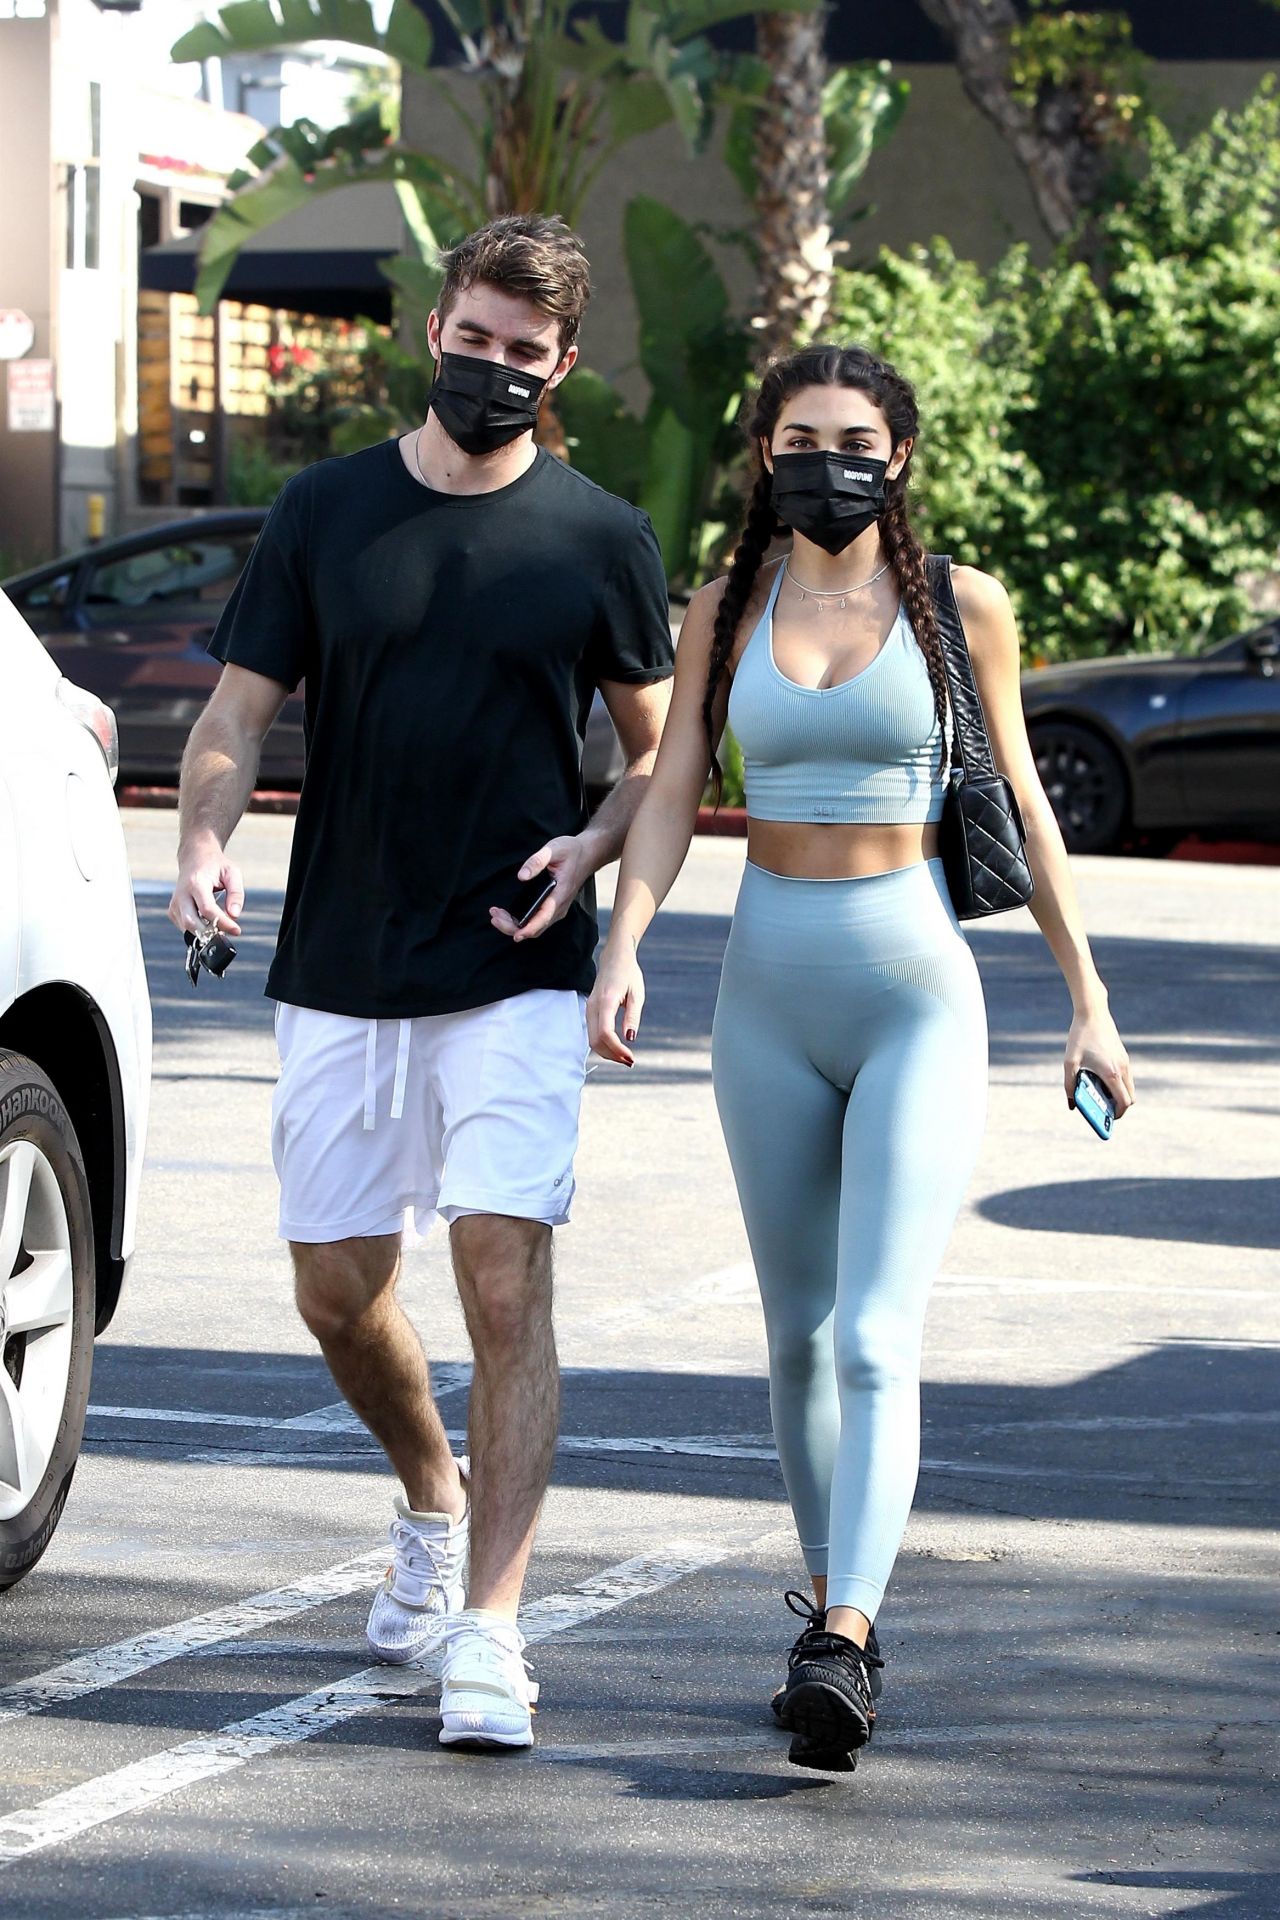 https://celebmafia.com/wp-content/uploads/2020/11/chantel-jeffries-and-andrew-taggart-out-in-la-11-18-2020-4.jpg